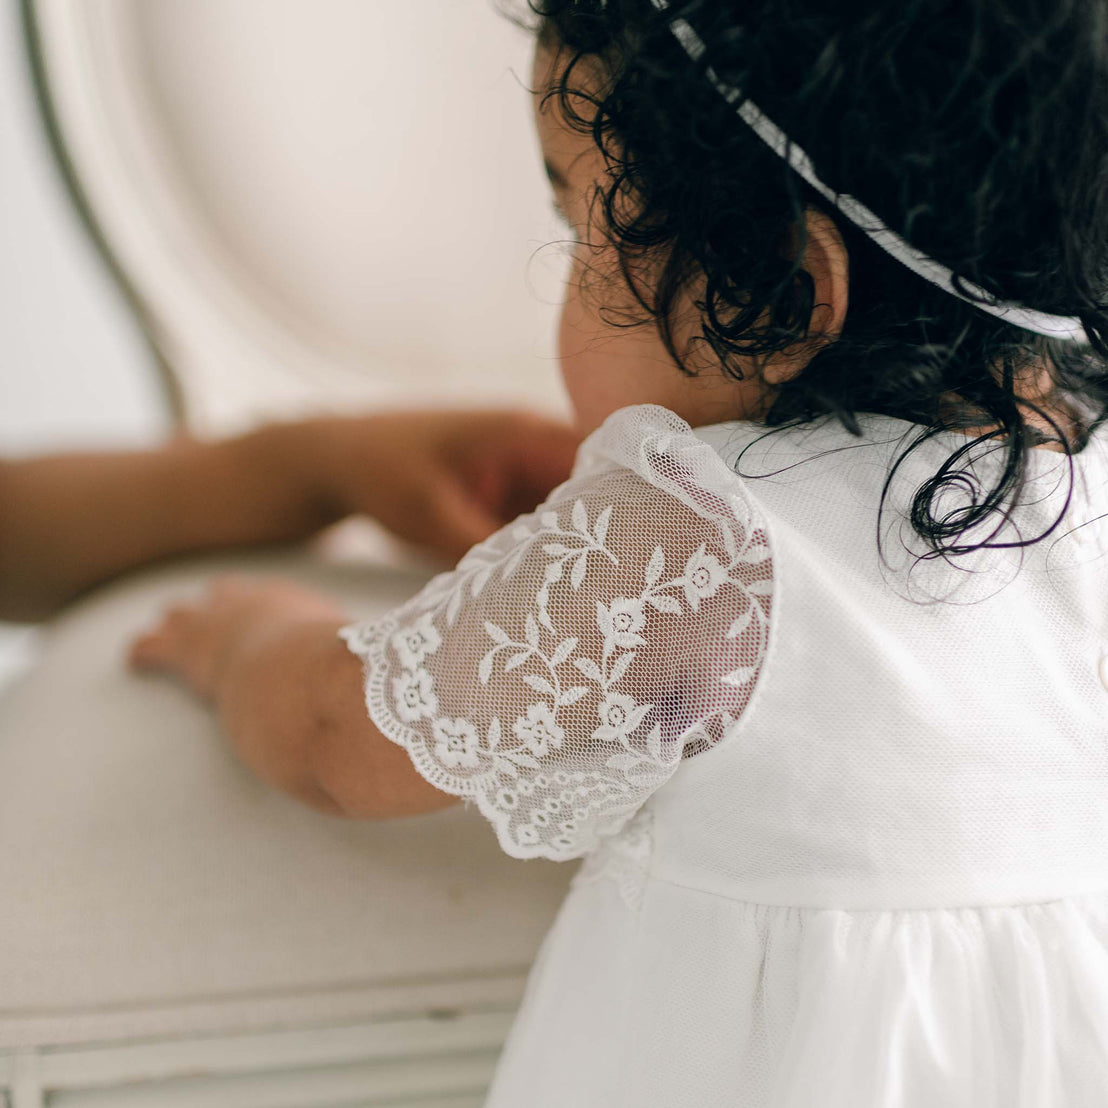 A child with curly hair, wearing an Ella Romper Dress with lace sleeves, is seen from the back. The child is touching a light-colored chair or table with both hands. The focus is on the intricate embroidered netting lace details of the dress.